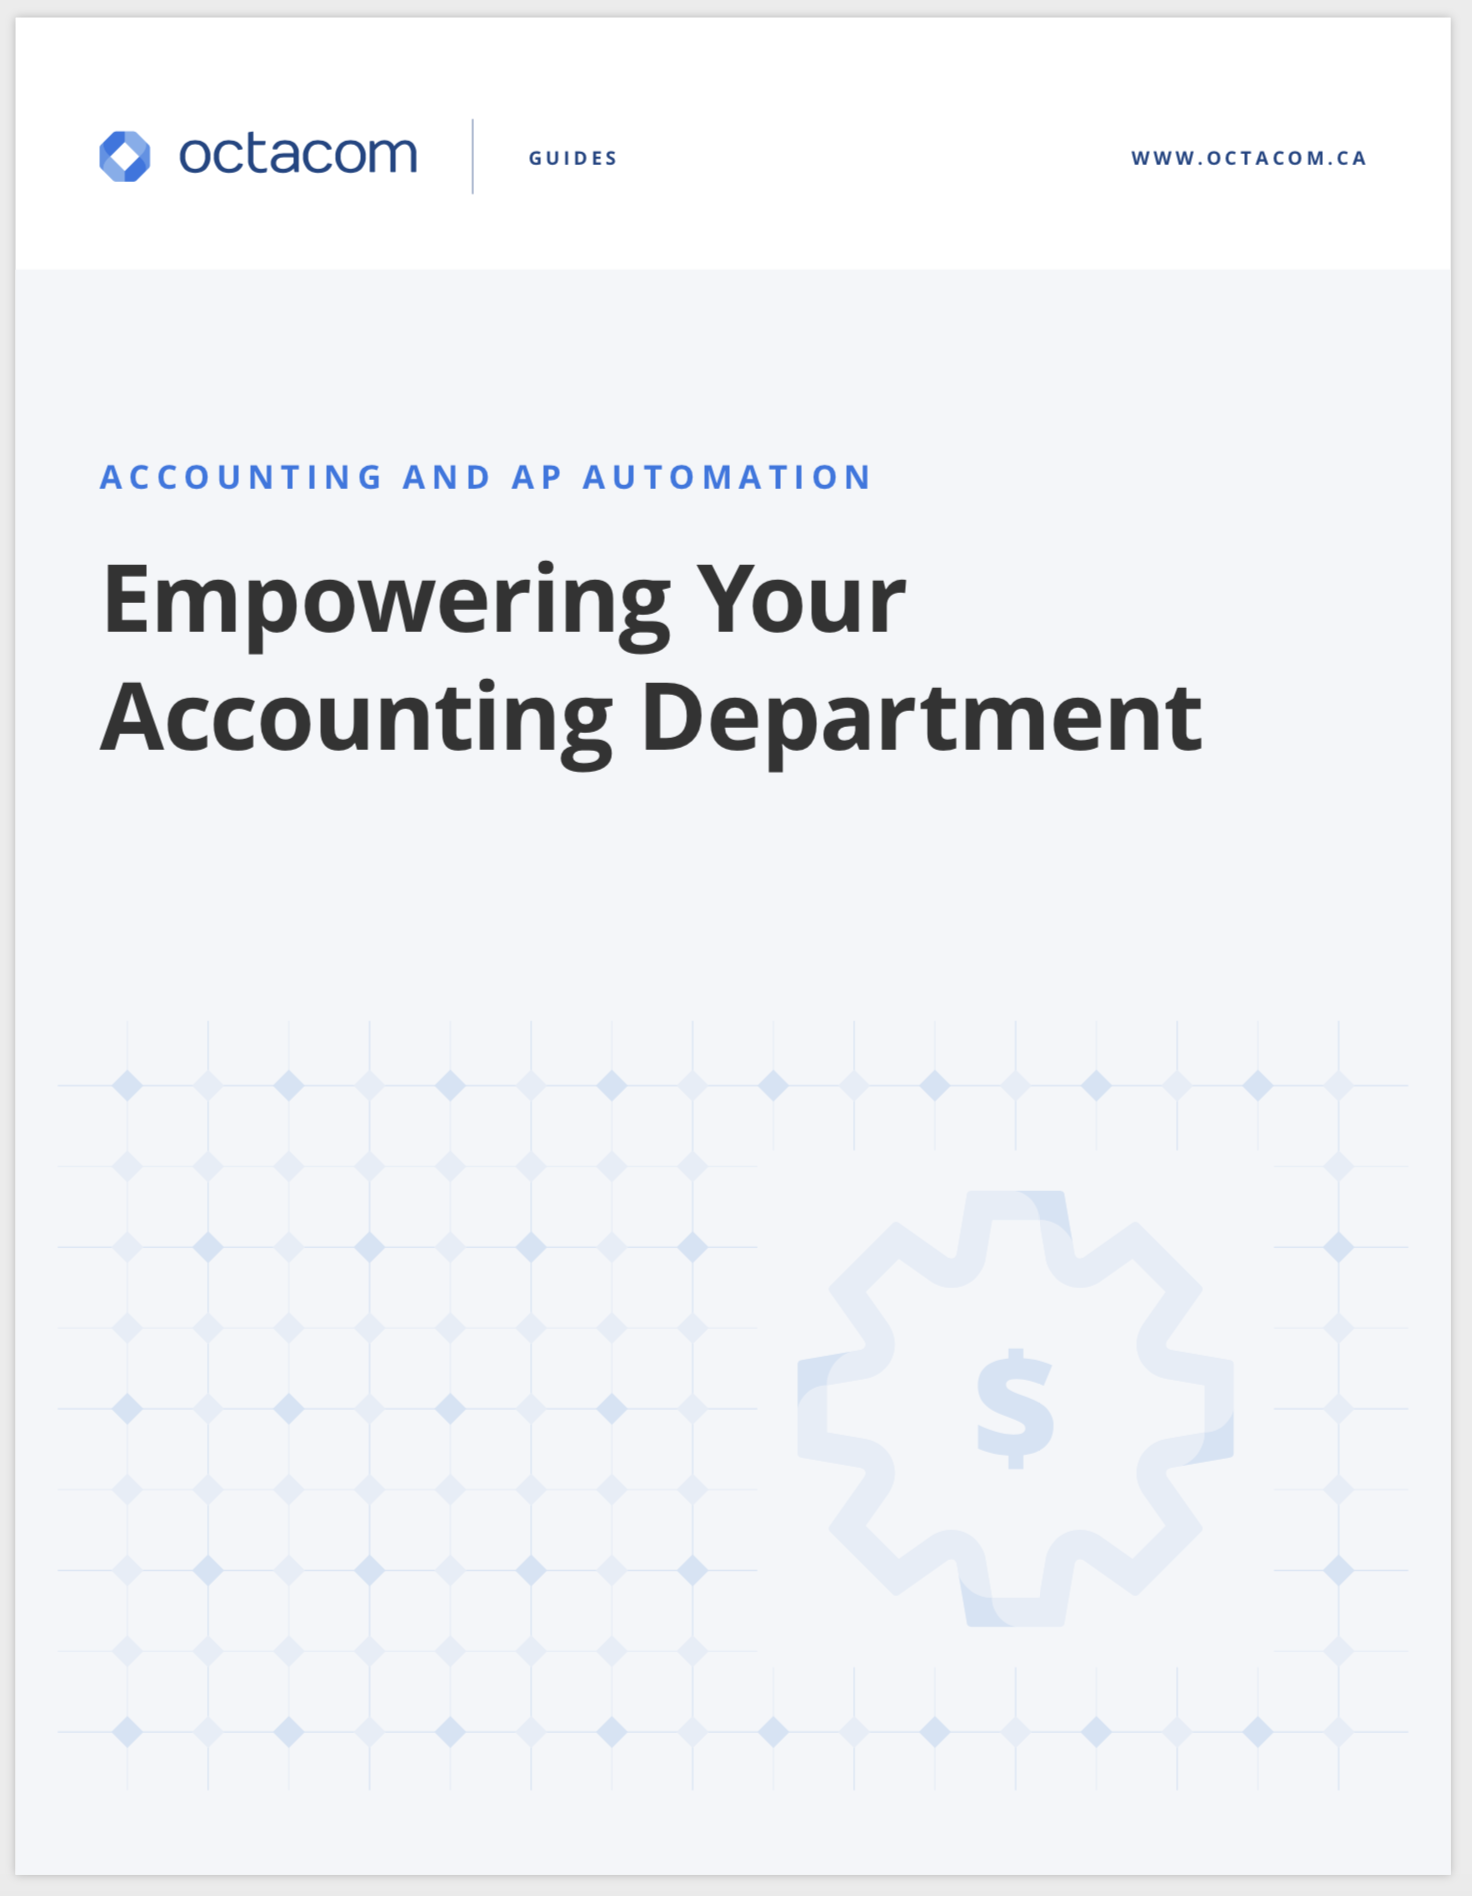 Accounting and AP Automation: Empowering Your Accounting Department booklet